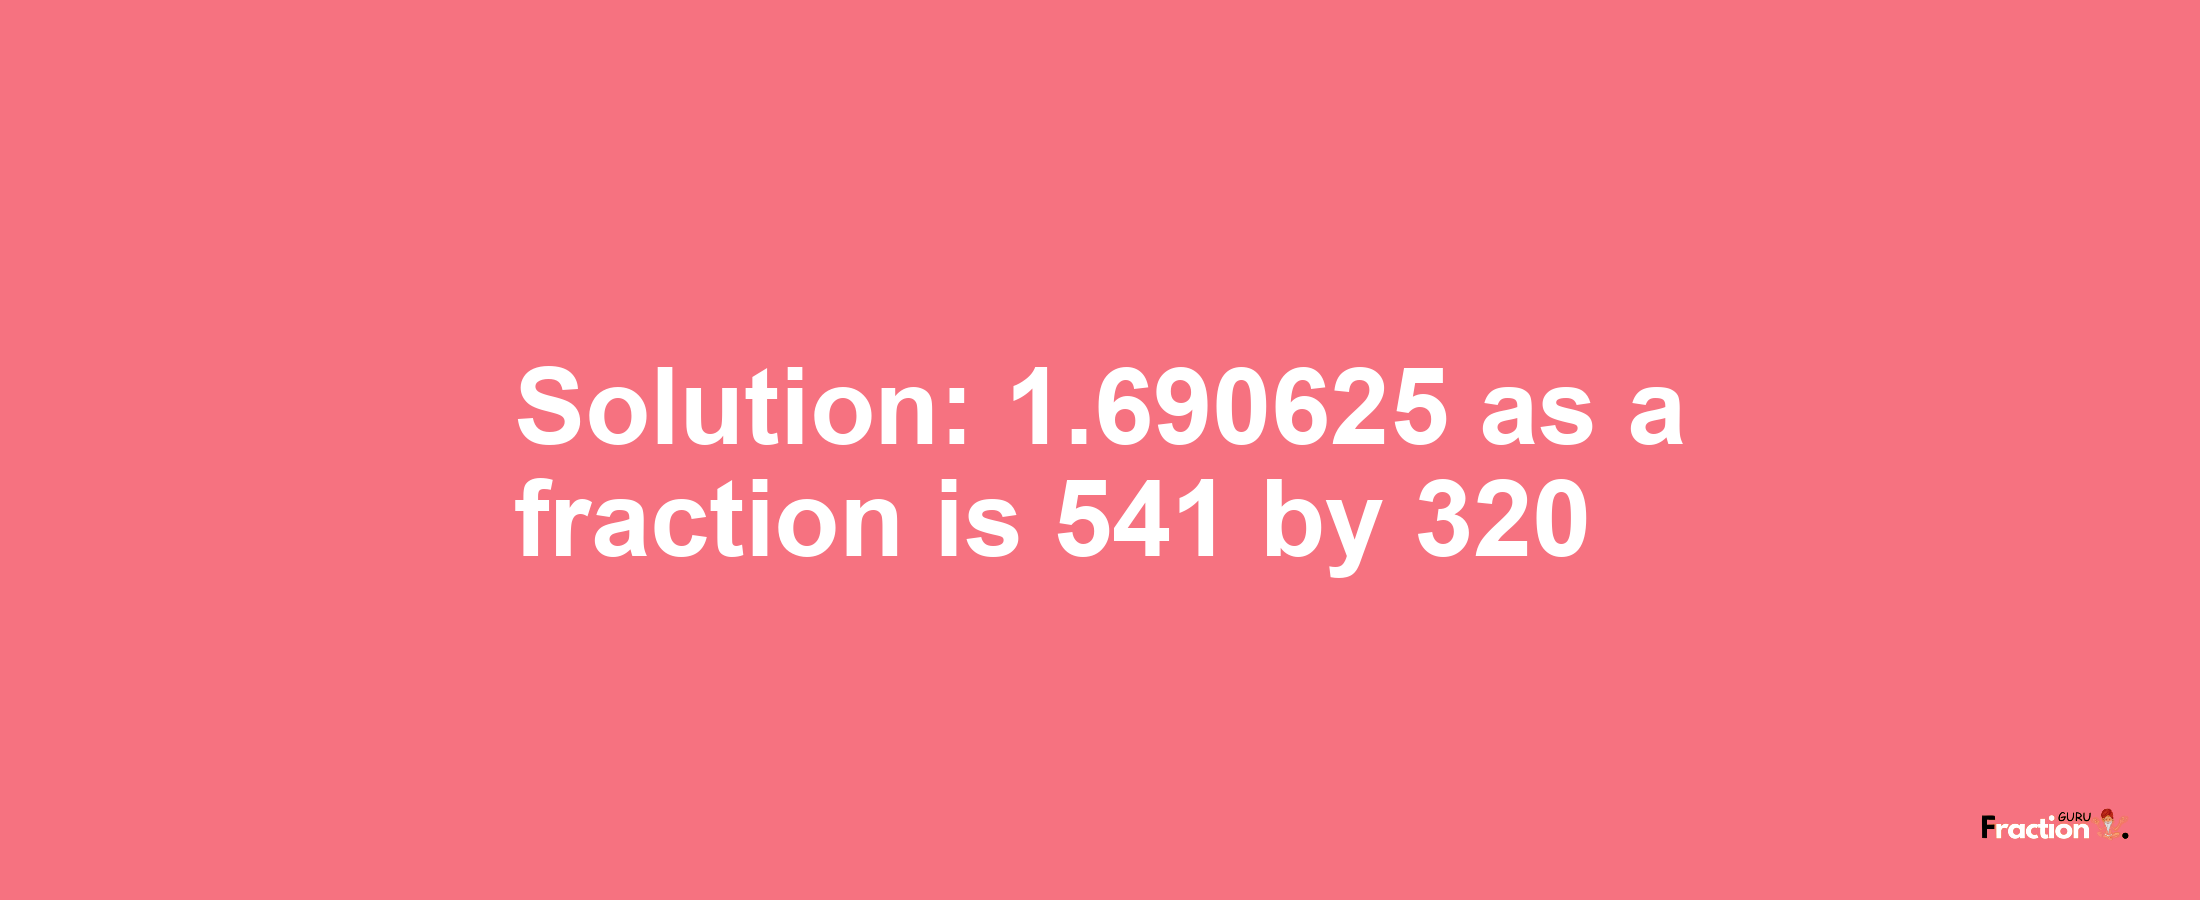 Solution:1.690625 as a fraction is 541/320